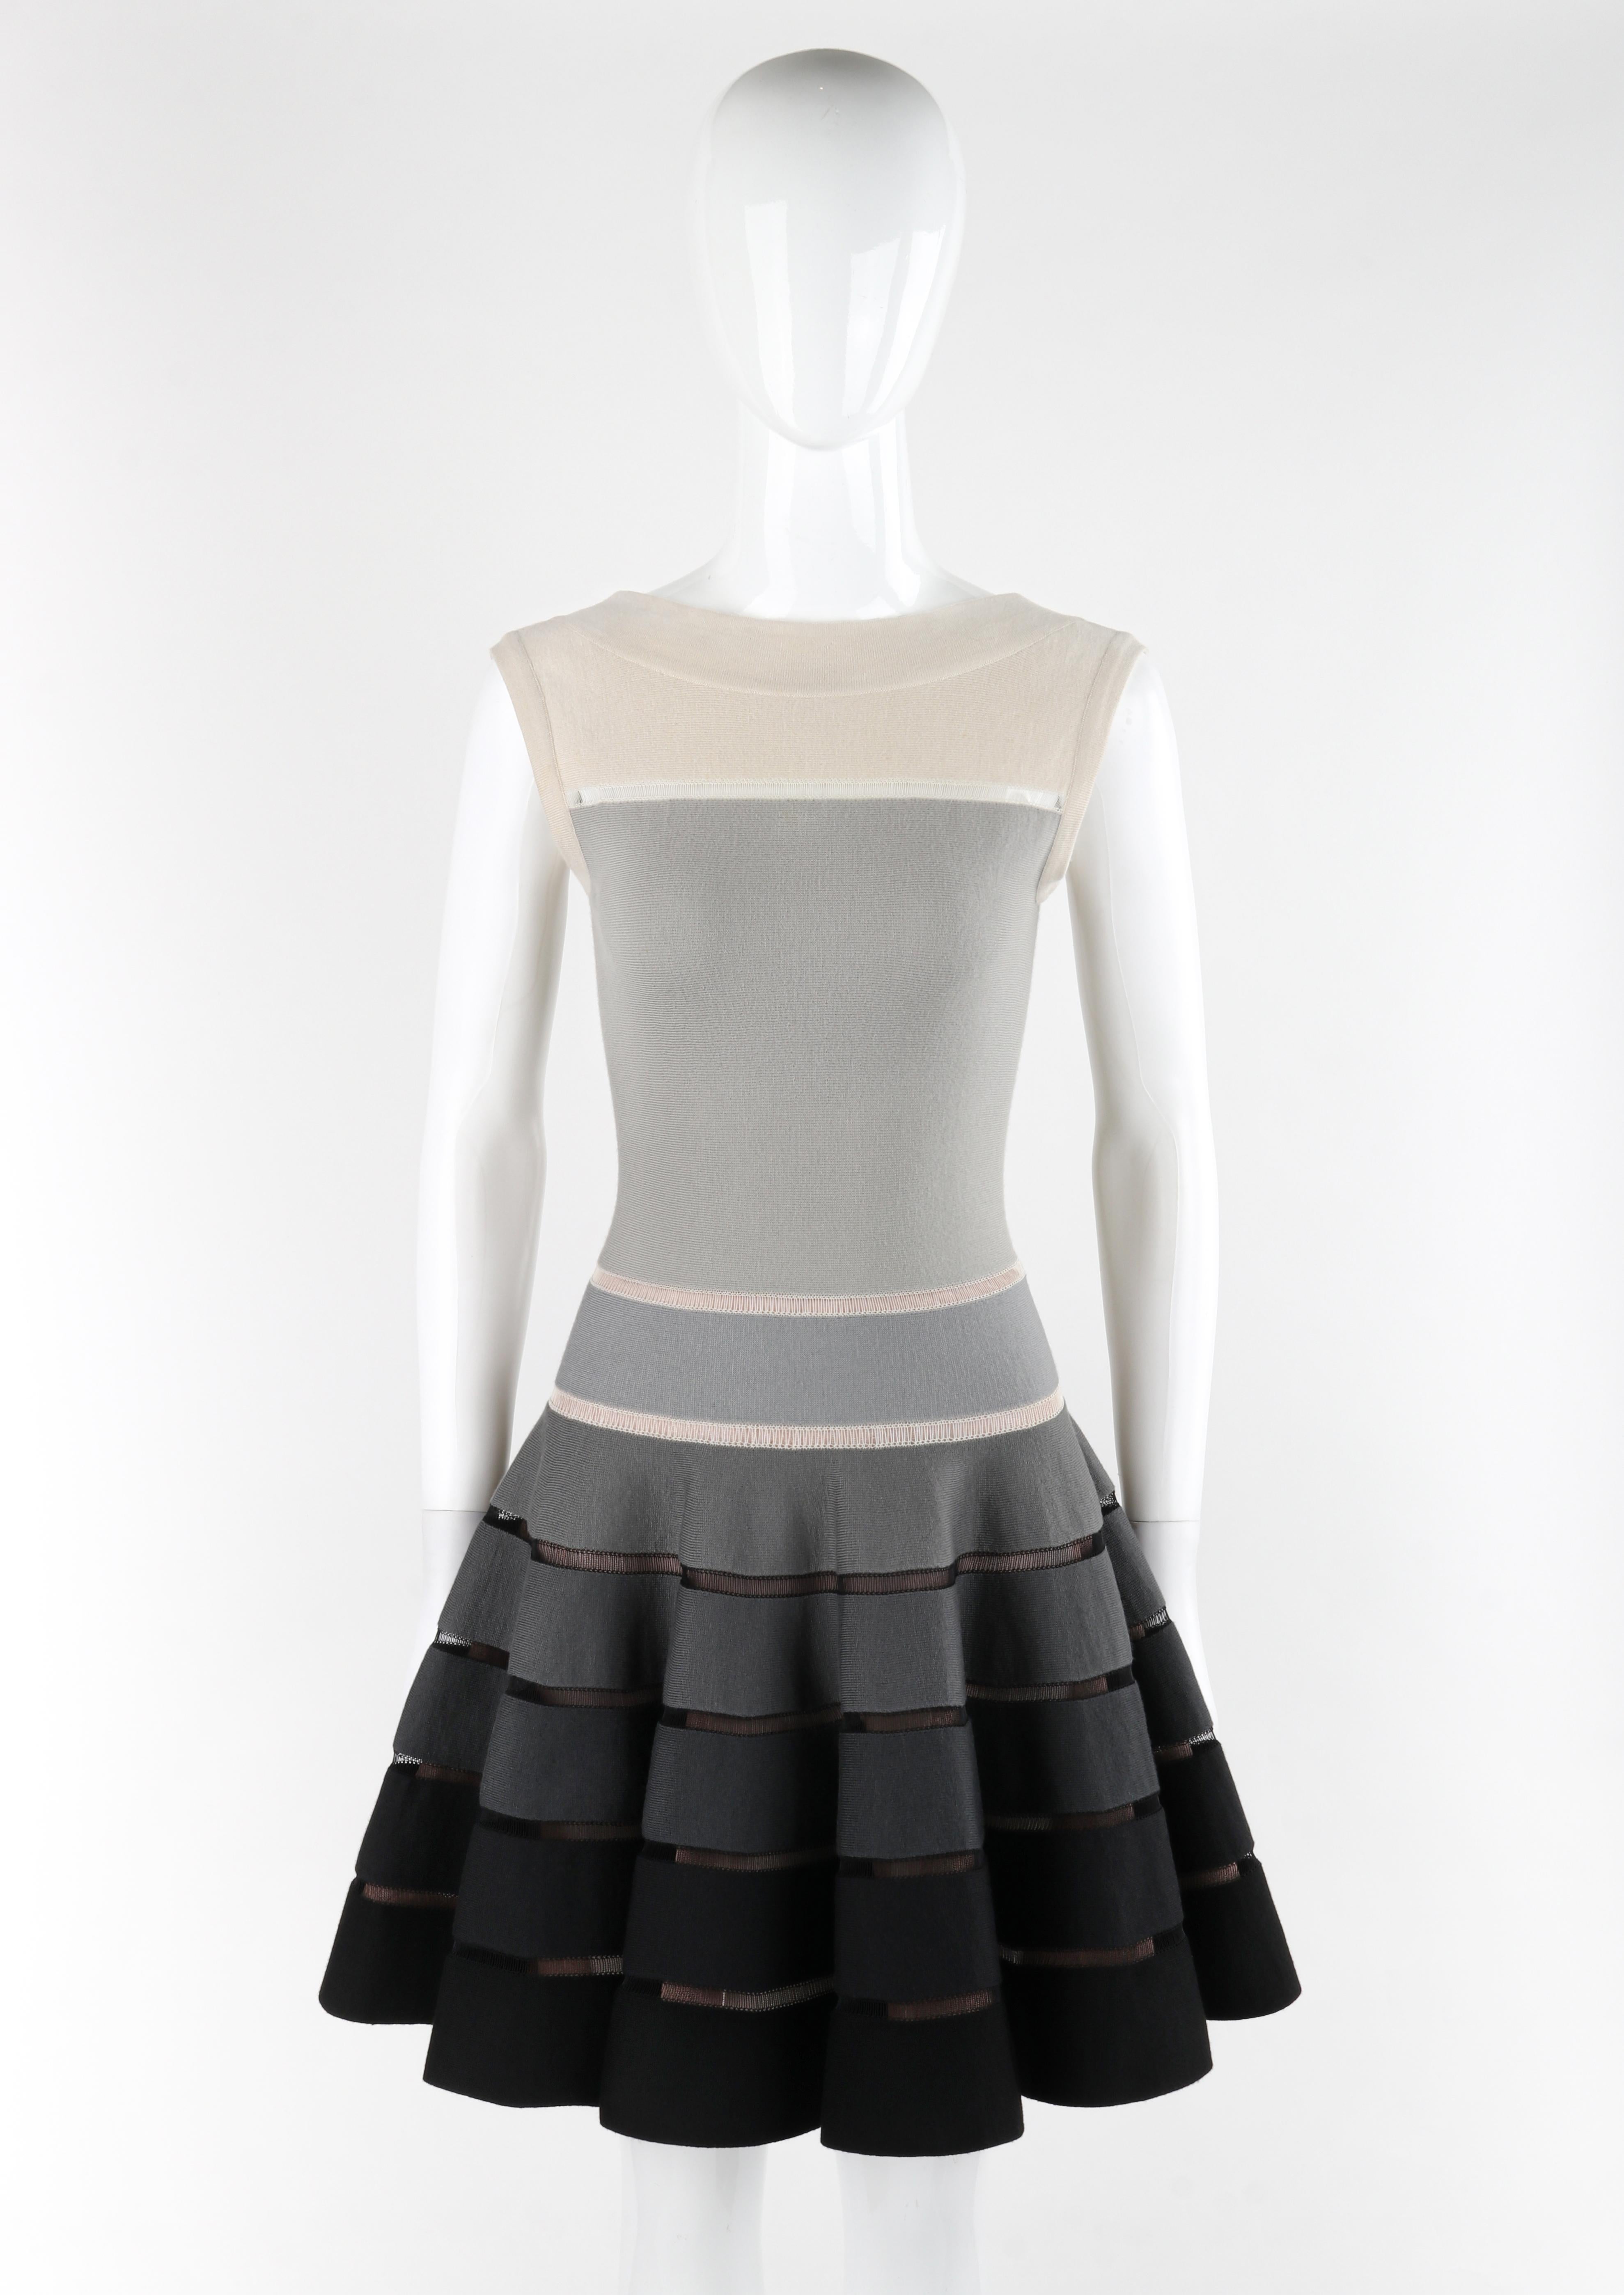 ALAIA PARIS c. 2010 Monochrome Ombre Wool Silk Fit & Flare Mini Dress

Brand / Manufacturer: Alaia Paris
Circa: 2010
Designer: Azzedine Alaïa
Style: Fit and Flare Mini Dress
Color(s): Shades of Cream, Grey, Black
Lined: Yes
Marked Fabric: 